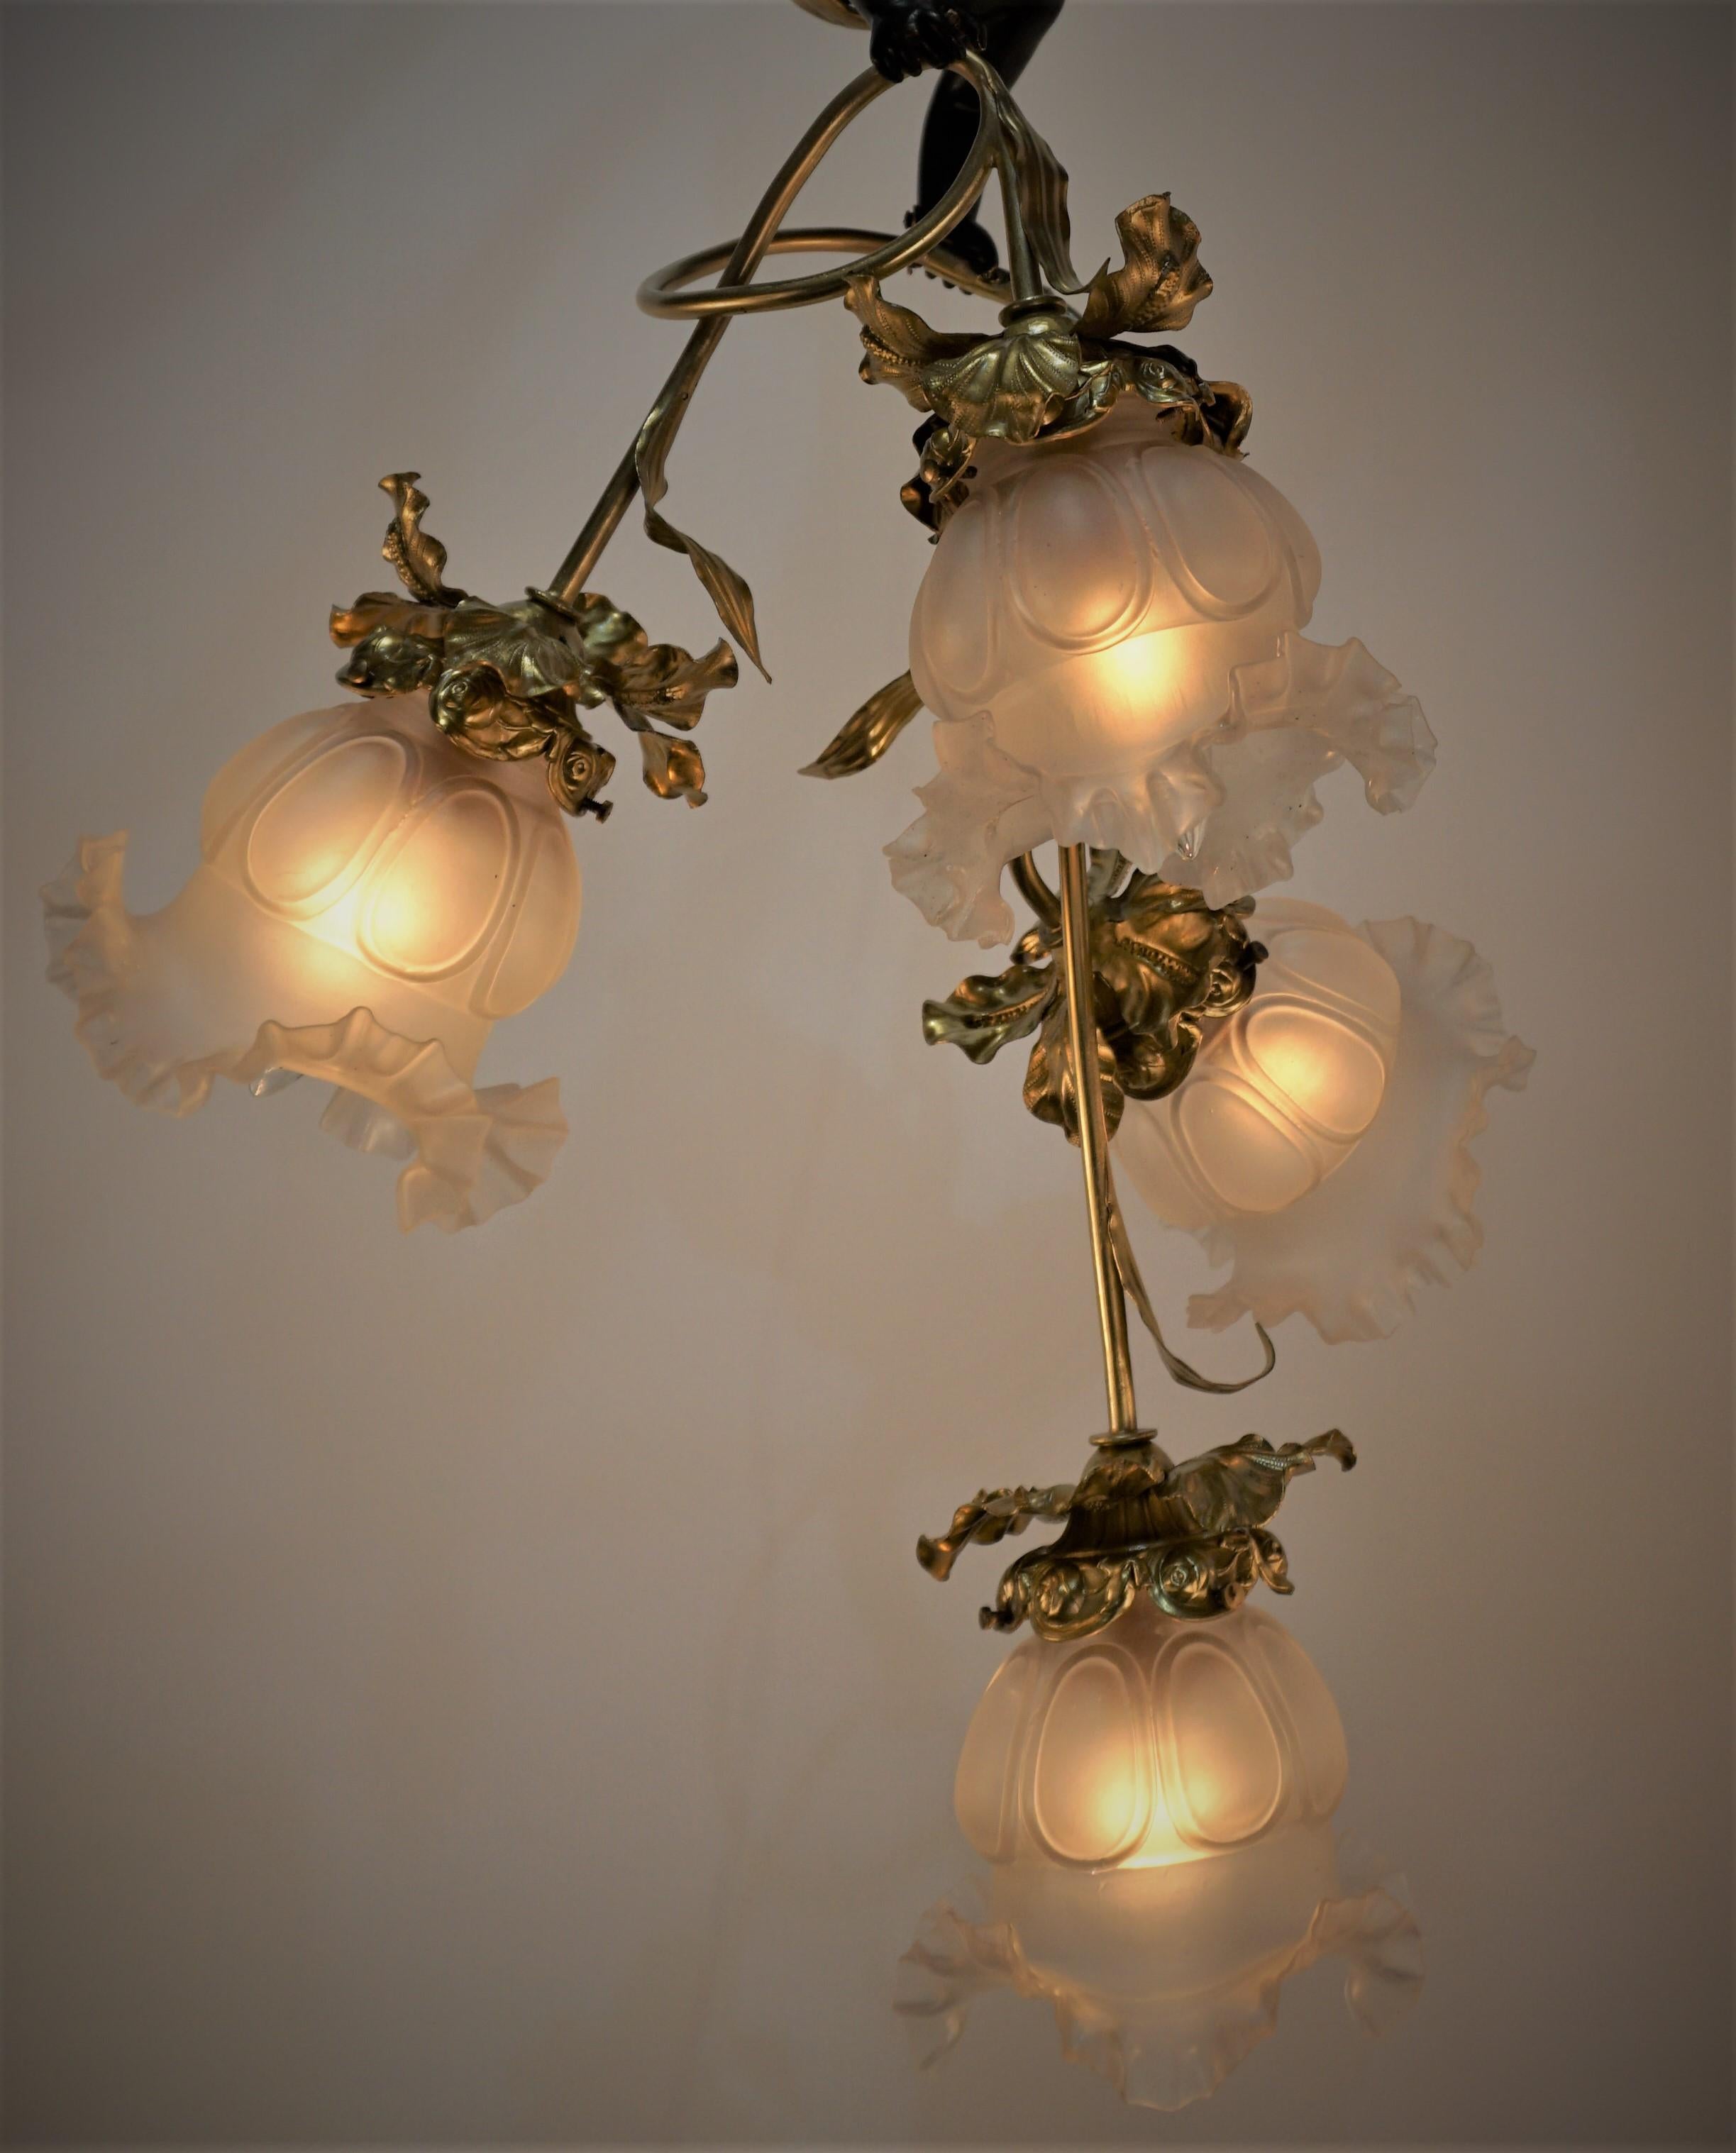 Handcrafted in France during the 1910's, this gorgeous chandelier features hand blown glass shades and oxidized cherub centerpiece. Beautiful organically inspired bronze detail work can be found throughout the chandelier, characteristic of classic